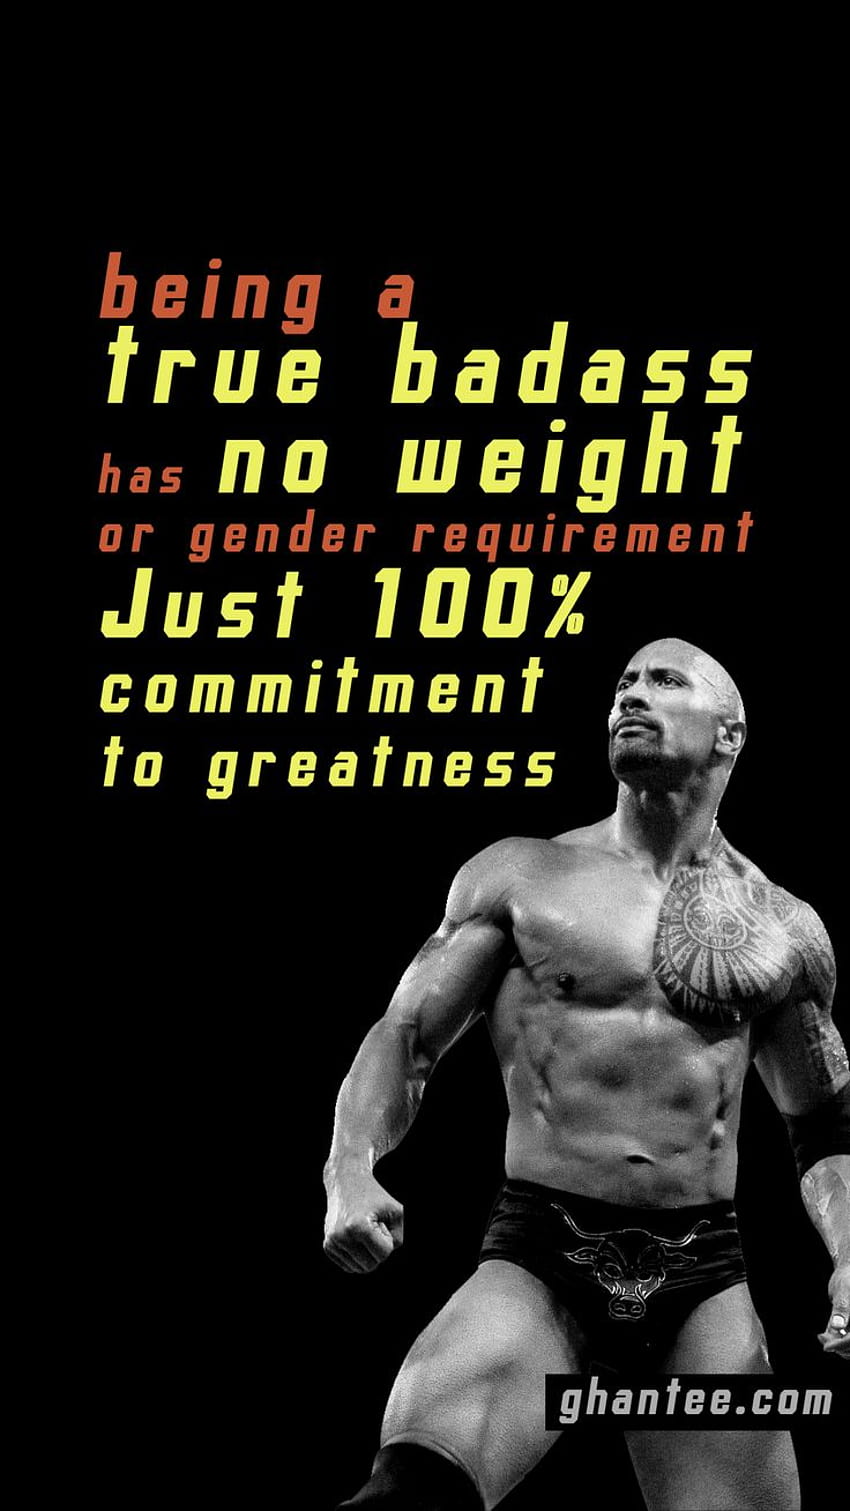 the rock funny quotes wwe